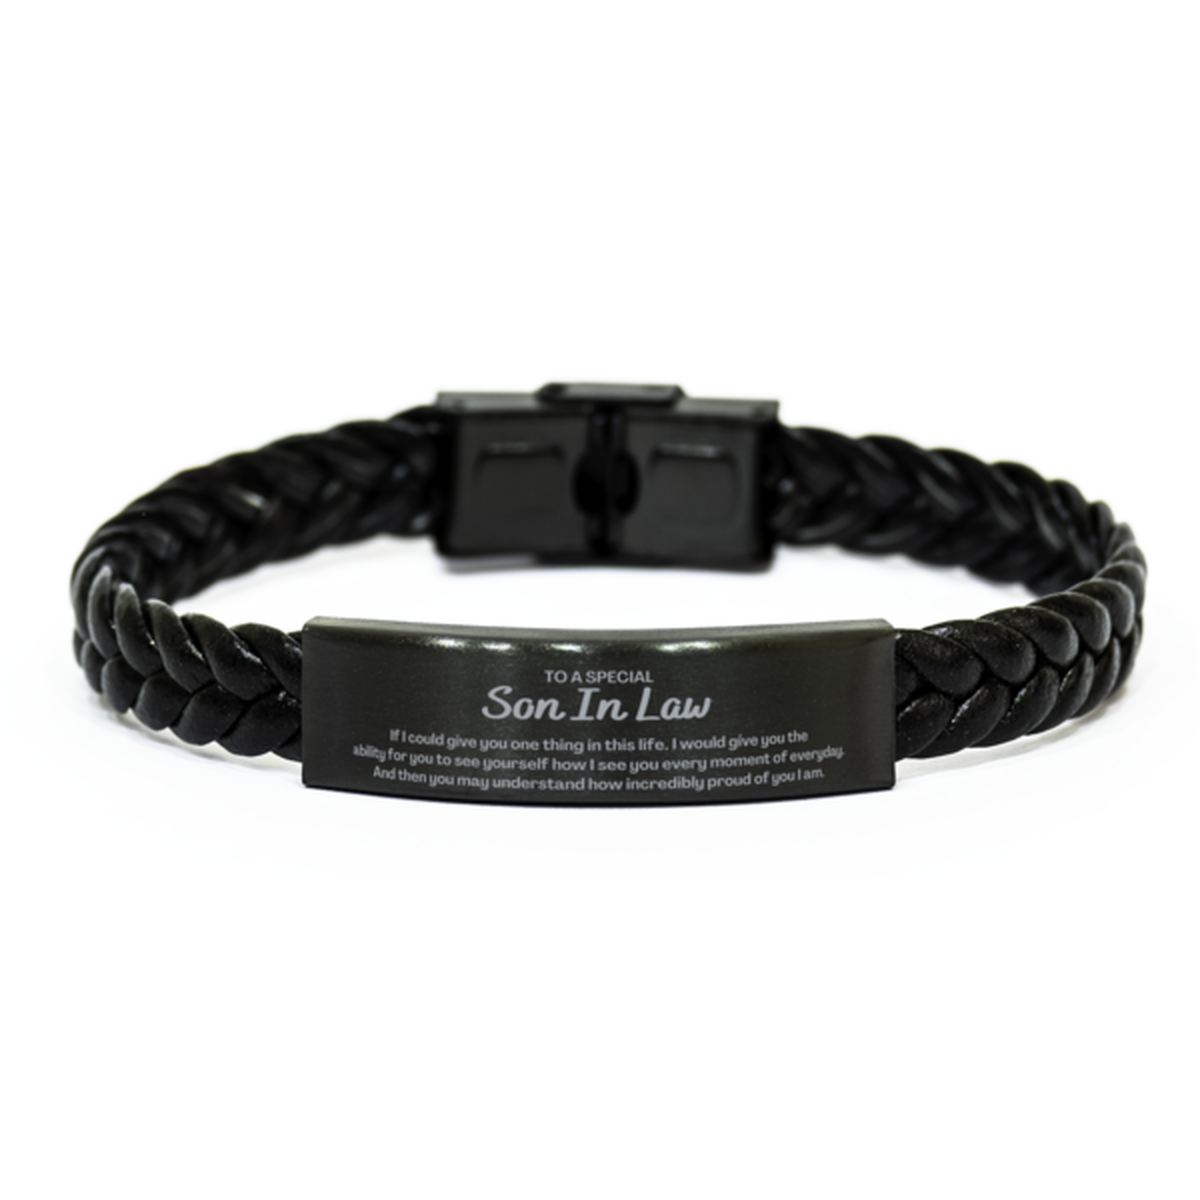 To My Son In Law Braided Leather Bracelet, Gifts For Son In Law Engraved, Inspirational Gifts for Christmas Birthday, Epic Gifts for Son In Law To A Special Son In Law how incredibly proud of you I am